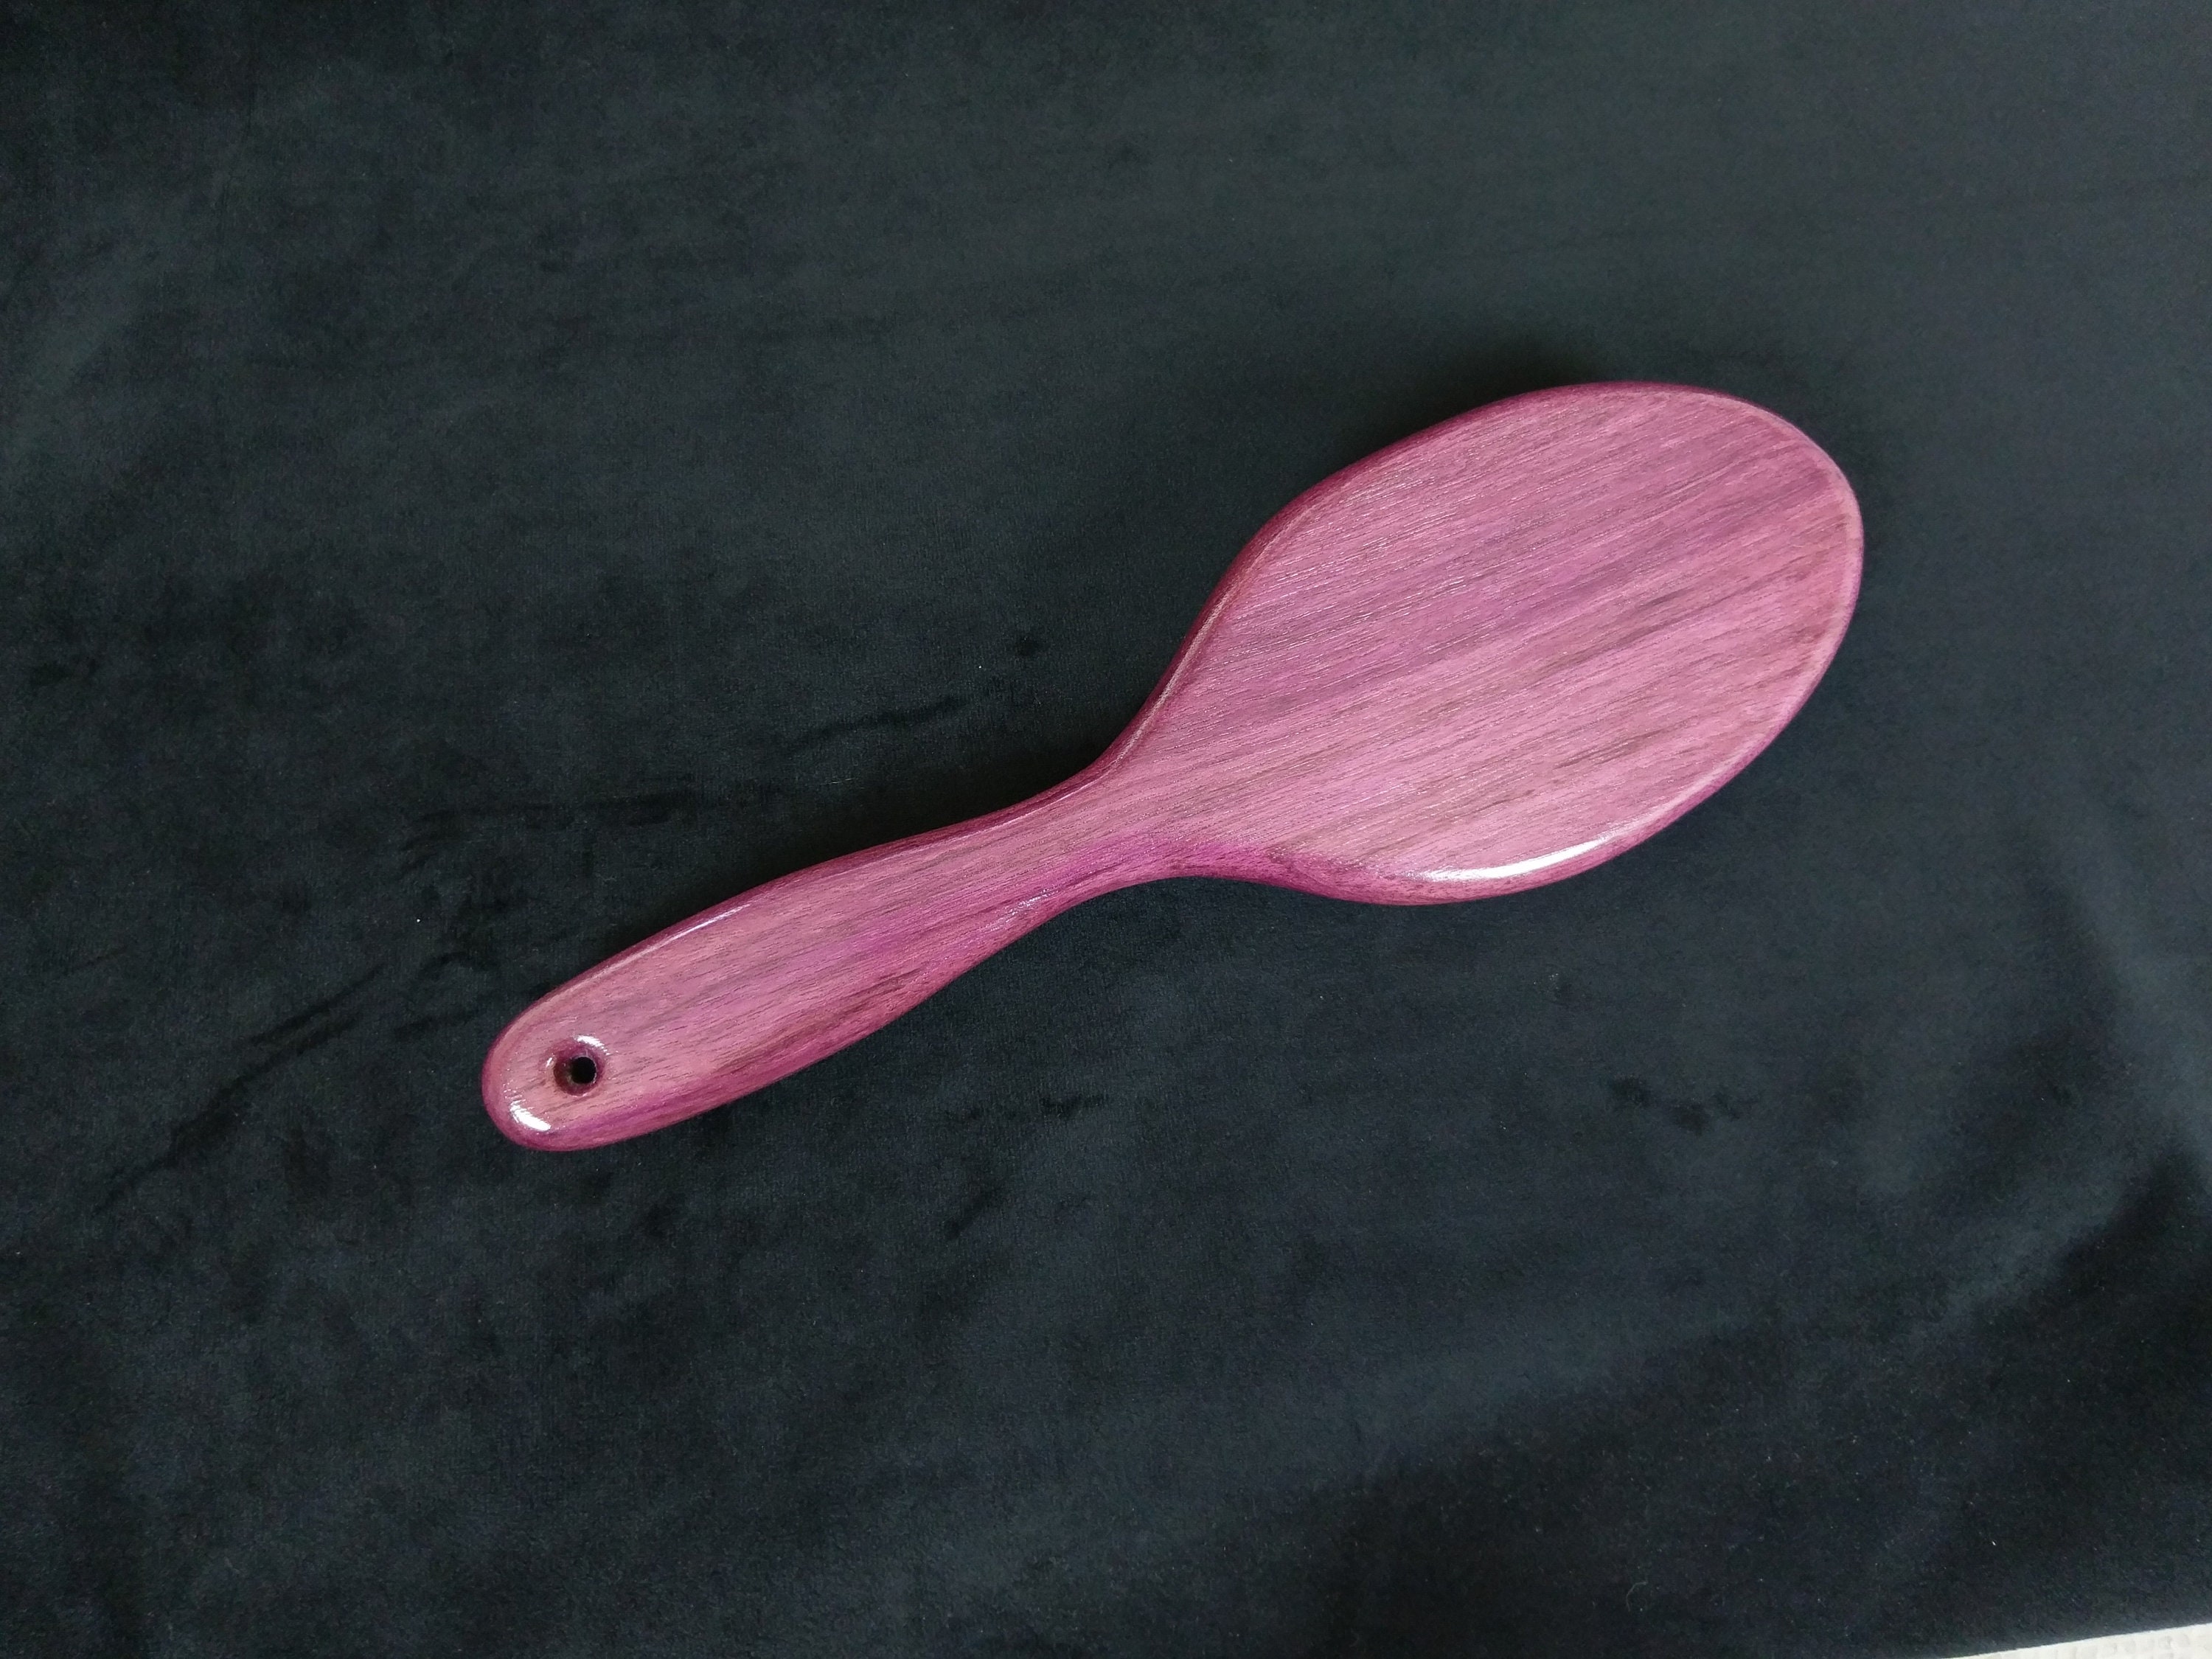 Small Spiked Wood Spanking Paddle Adult Sex Toy